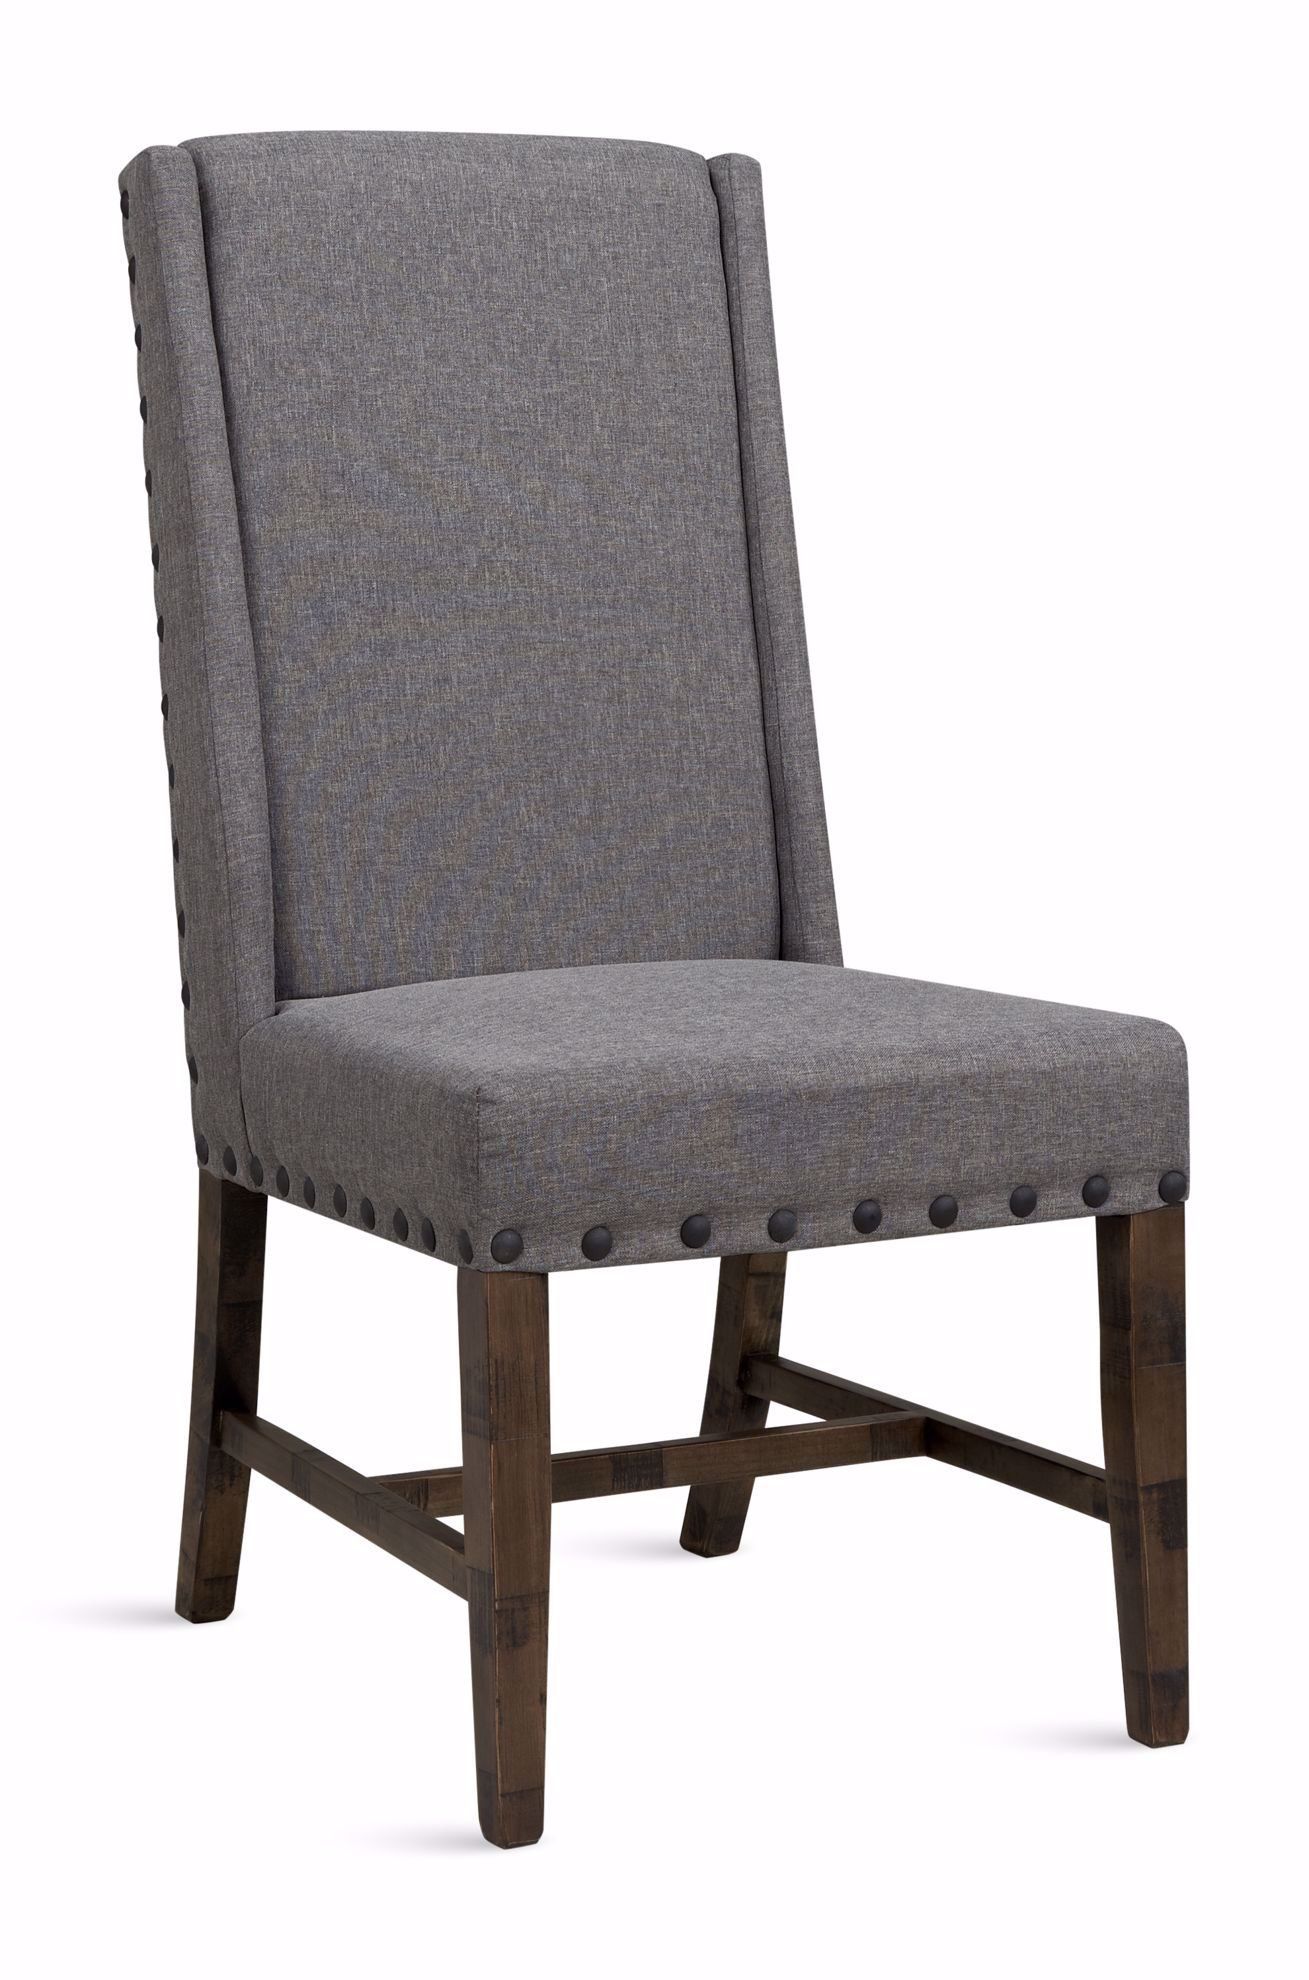 Loft Brown Grey Upholstered Chair